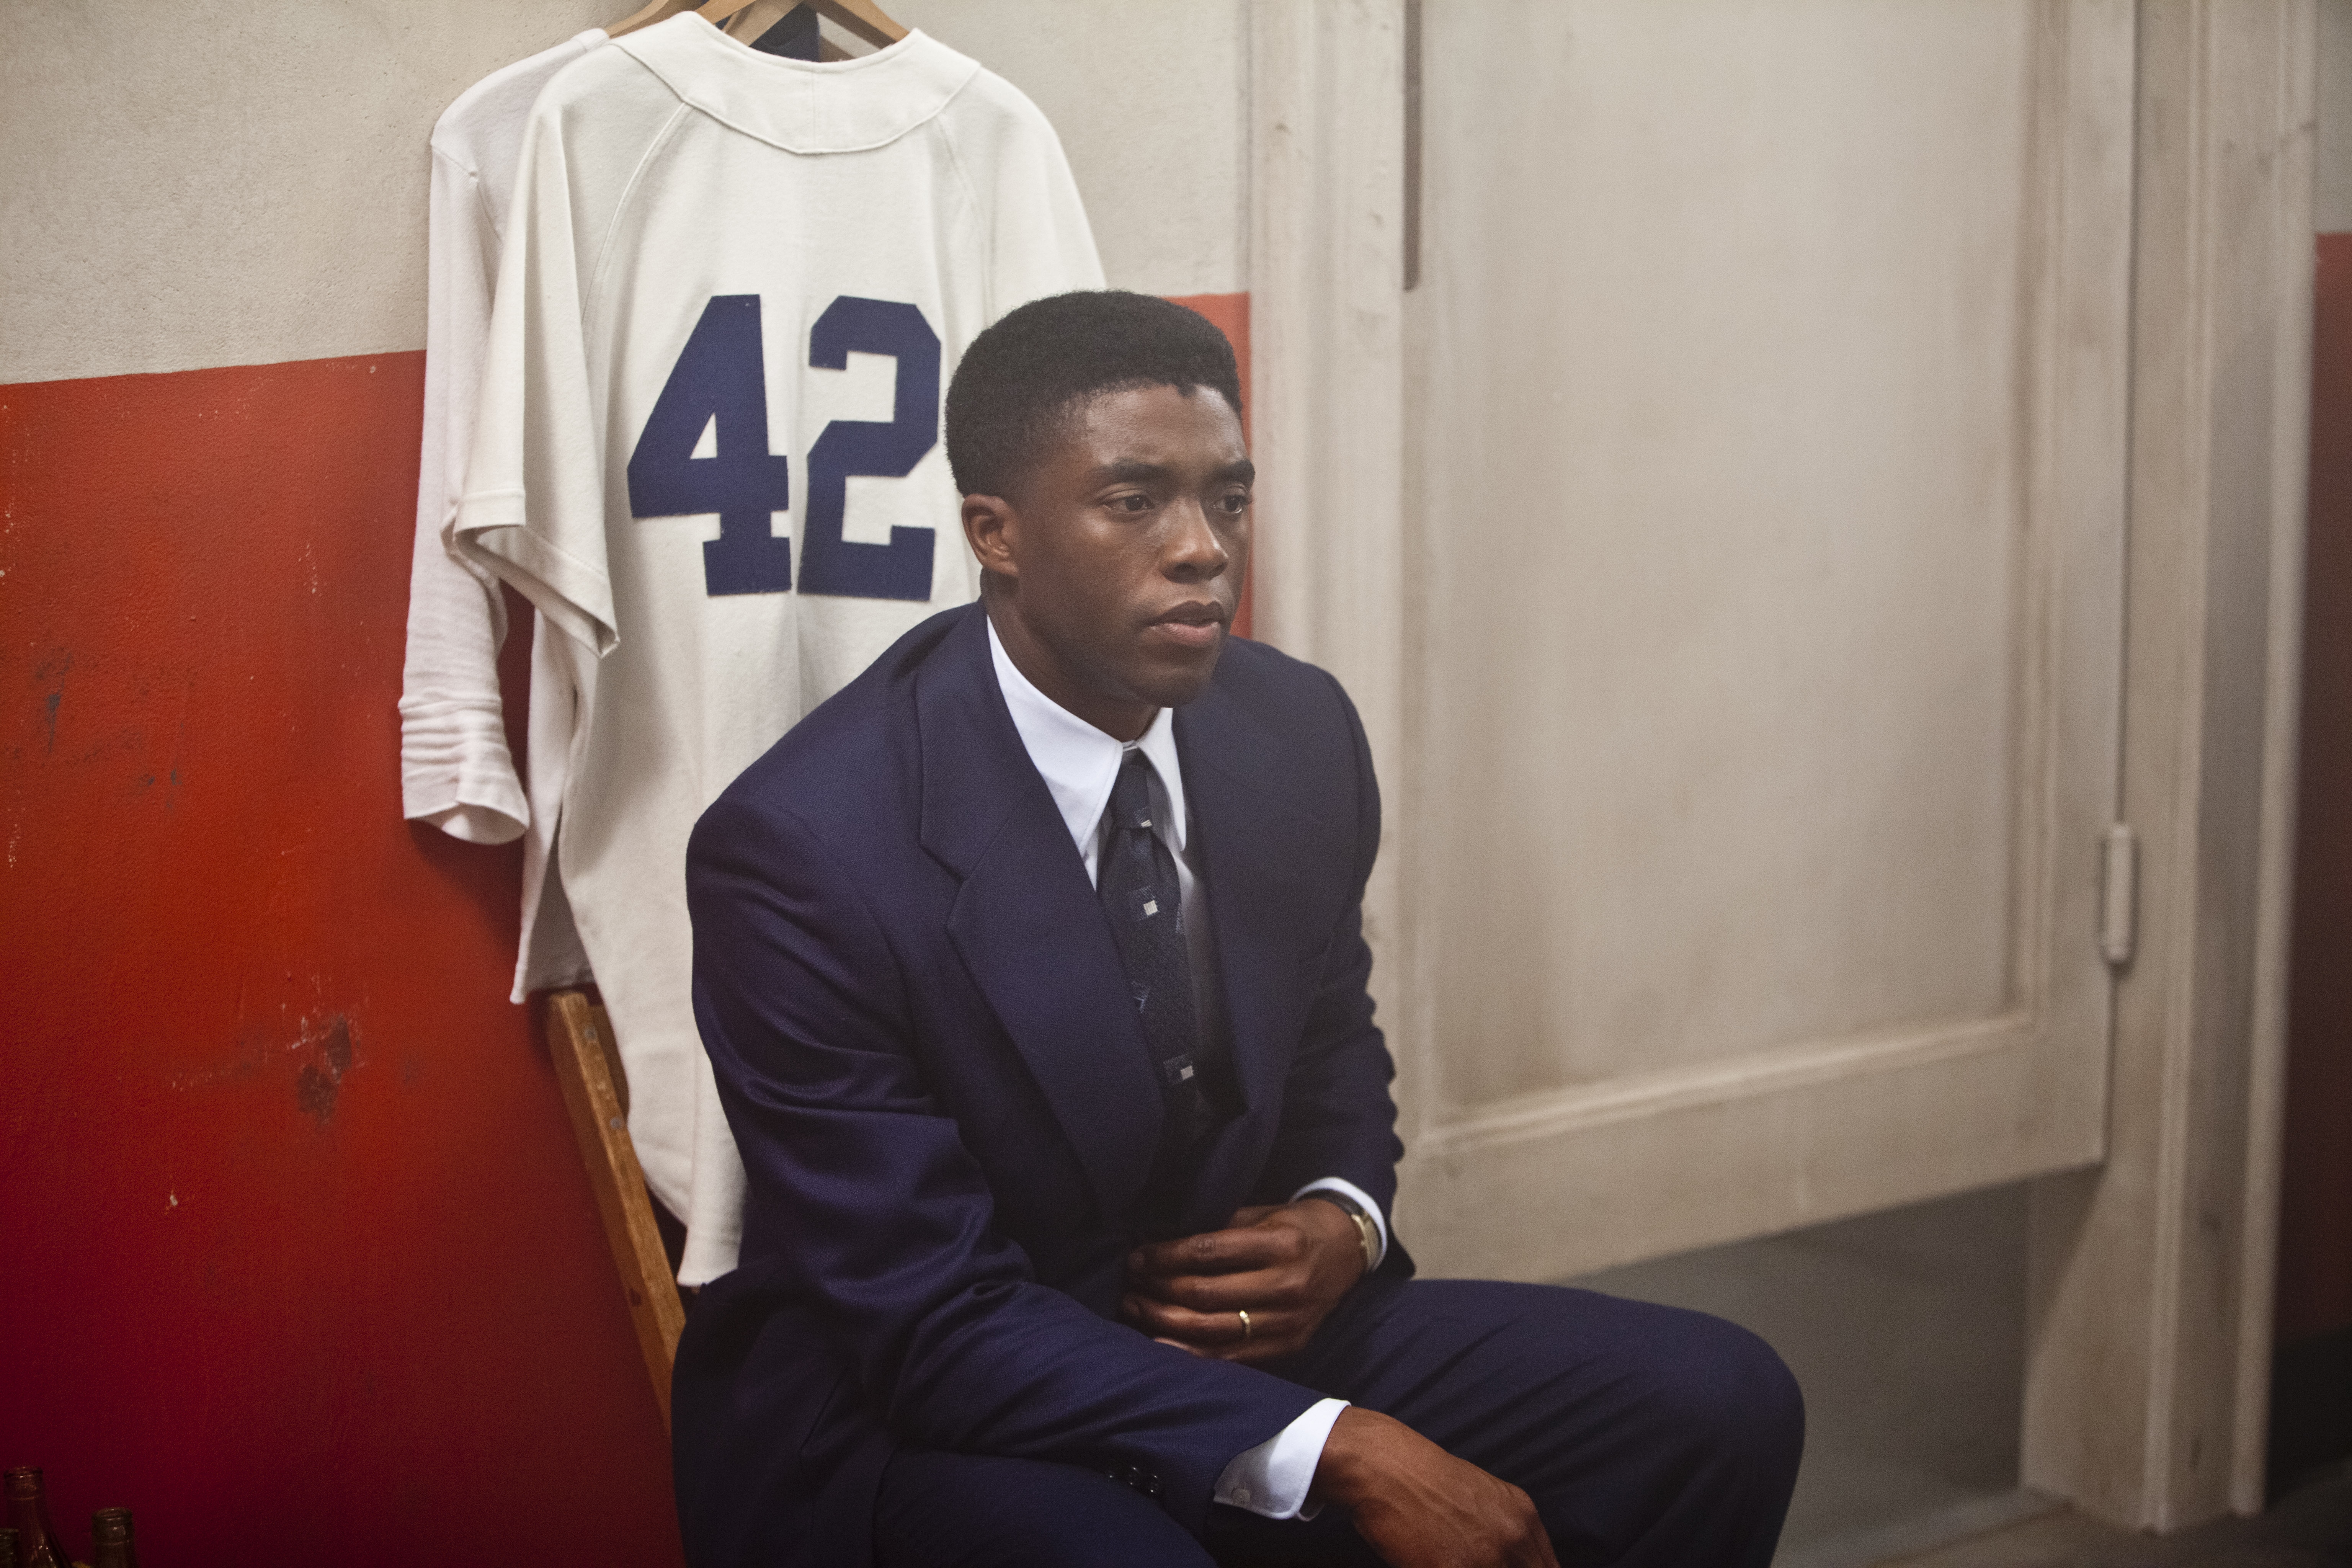 Chadwick Boseman receives his numbered Brooklyn Dodgers jersey in "42."